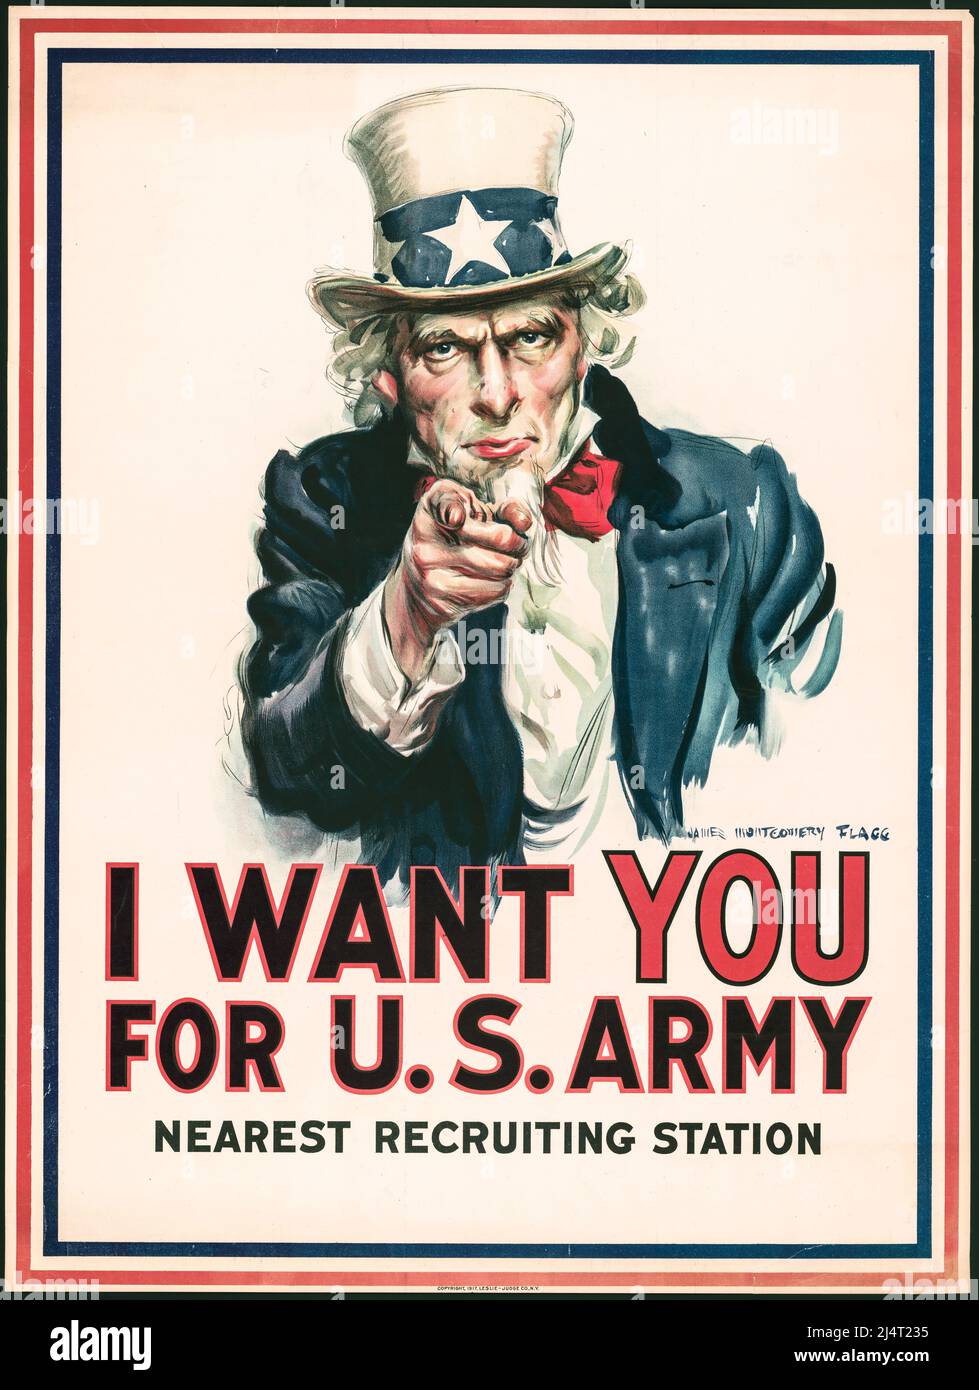 WW1 Propaganda Poster UNCLE SAM  ' I want you for U.S. Army' : nearest recruiting station / James Montgomery Flagg. 1917. Library of Congress War poster with the famous phrase 'I want you for U. S. Army' shows Uncle Sam pointing his finger at the viewer in order to recruit soldiers for the American Army during World War I. The printed phrase 'Nearest recruiting station' has a blank space below to add the address for enlisting. America USA Stock Photo